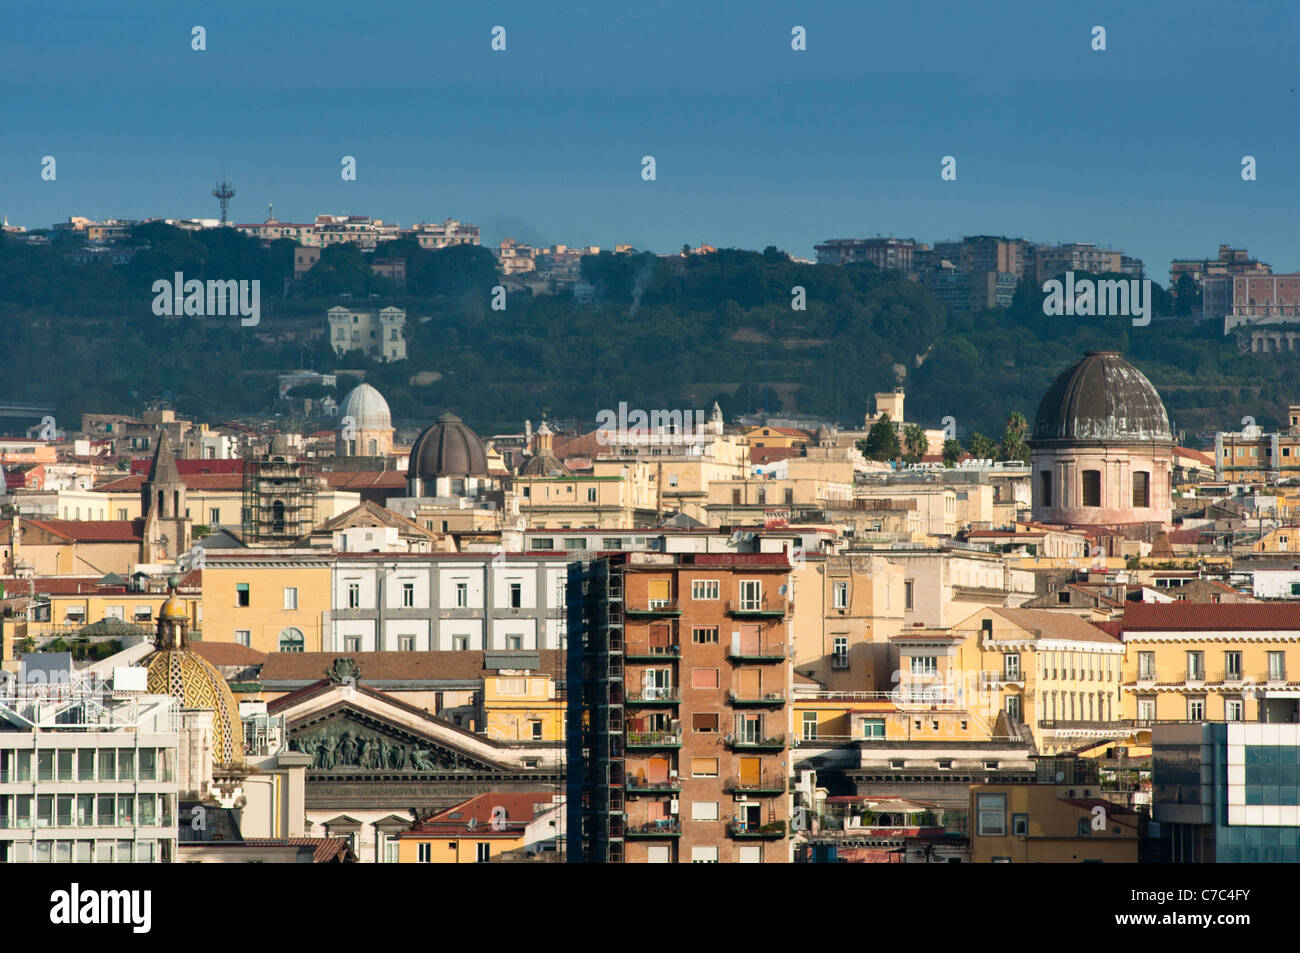 Naples (Napoli) skyline with church domes and old apartment blocks. Italy. 2011 Stock Photo